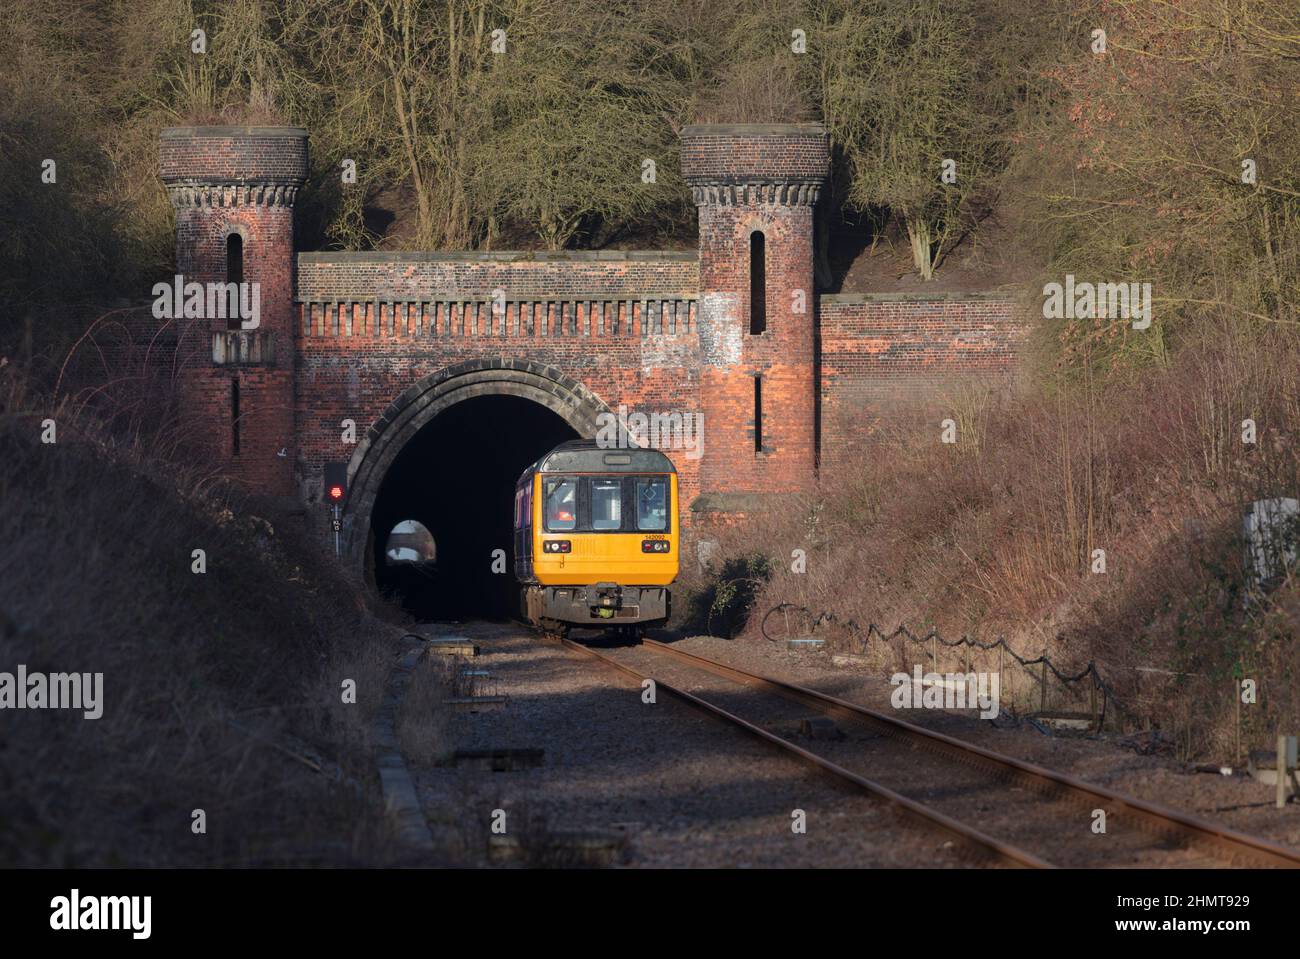 Northern rail class 142 pacer train 142092 leaving Kirton Lindsey tunnel on the Brigg line, Lincolnshire Stock Photo